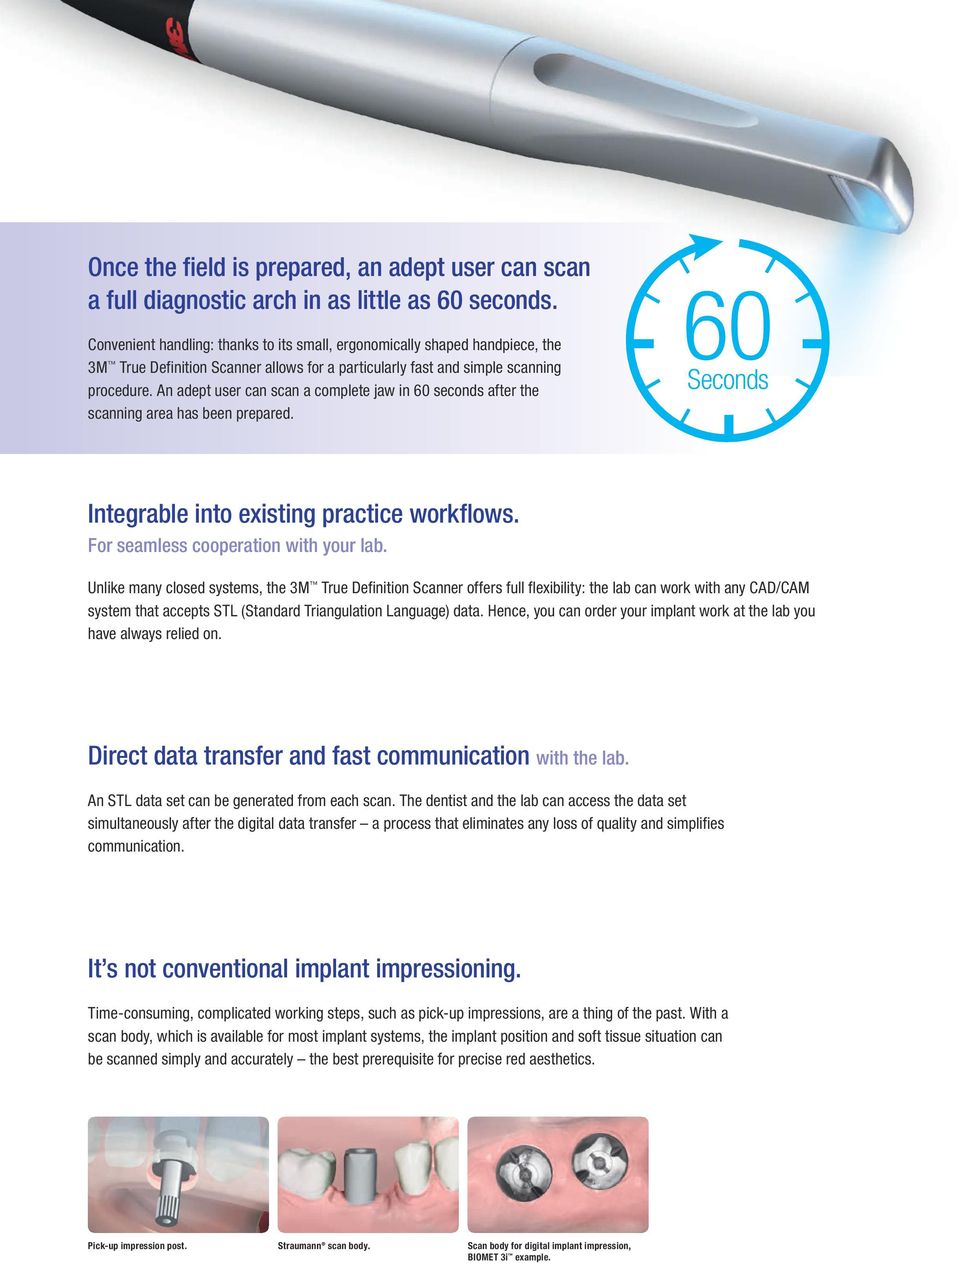 An adept user can scan a complete jaw in 60 seconds after the scanning area has been prepared. 60 Seconds Integrable into existing practice workflows. For seamless cooperation with your lab.